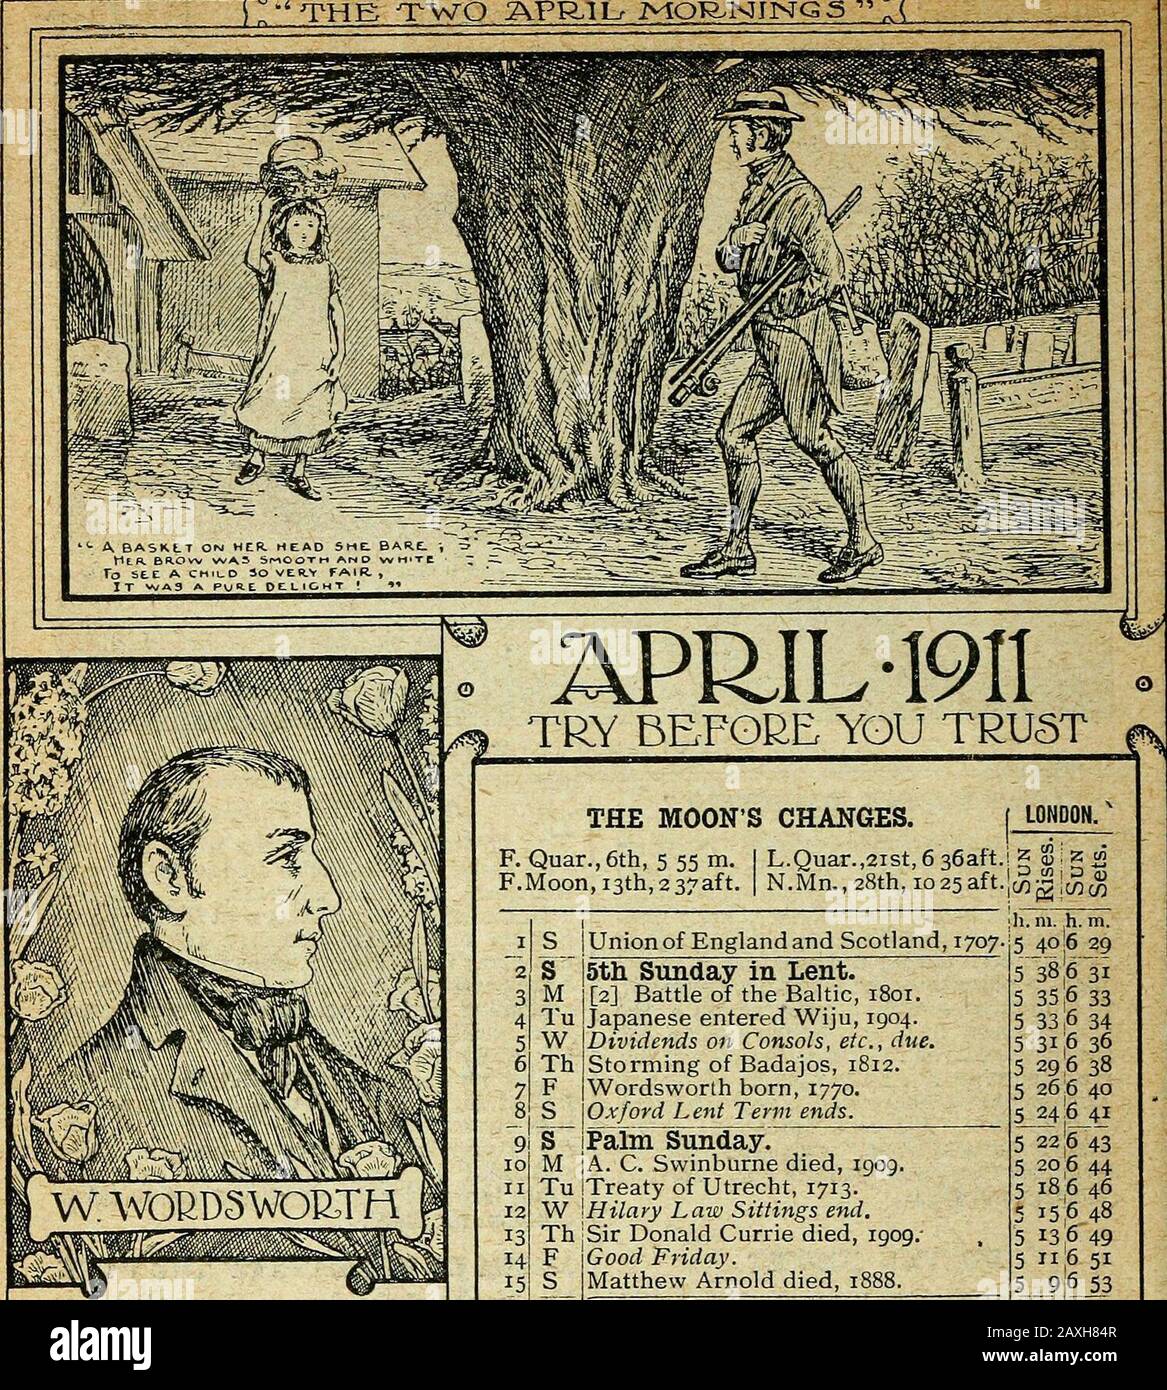 The Forfar Directory and Yearbook 1911 . rted off in a last despair-ing attempt to catch his rival, and had almostsucceeded in his object when he was onceagain beaten by the wind and compelled toabandon the flight. NAMES OF THE DAYS OF THE WEEK The names of the days of the week are ofSaxon origin, their spelling, of course, beingmodernised. The Romans named the firsttwo days after the sun and moon respectively,and the Saxons followed their example, butin their own language. Thus Sunnan-daeg isour Sunday and Monan-daeg our Monday.The other five days were named after godsor other mythical person Stock Photo